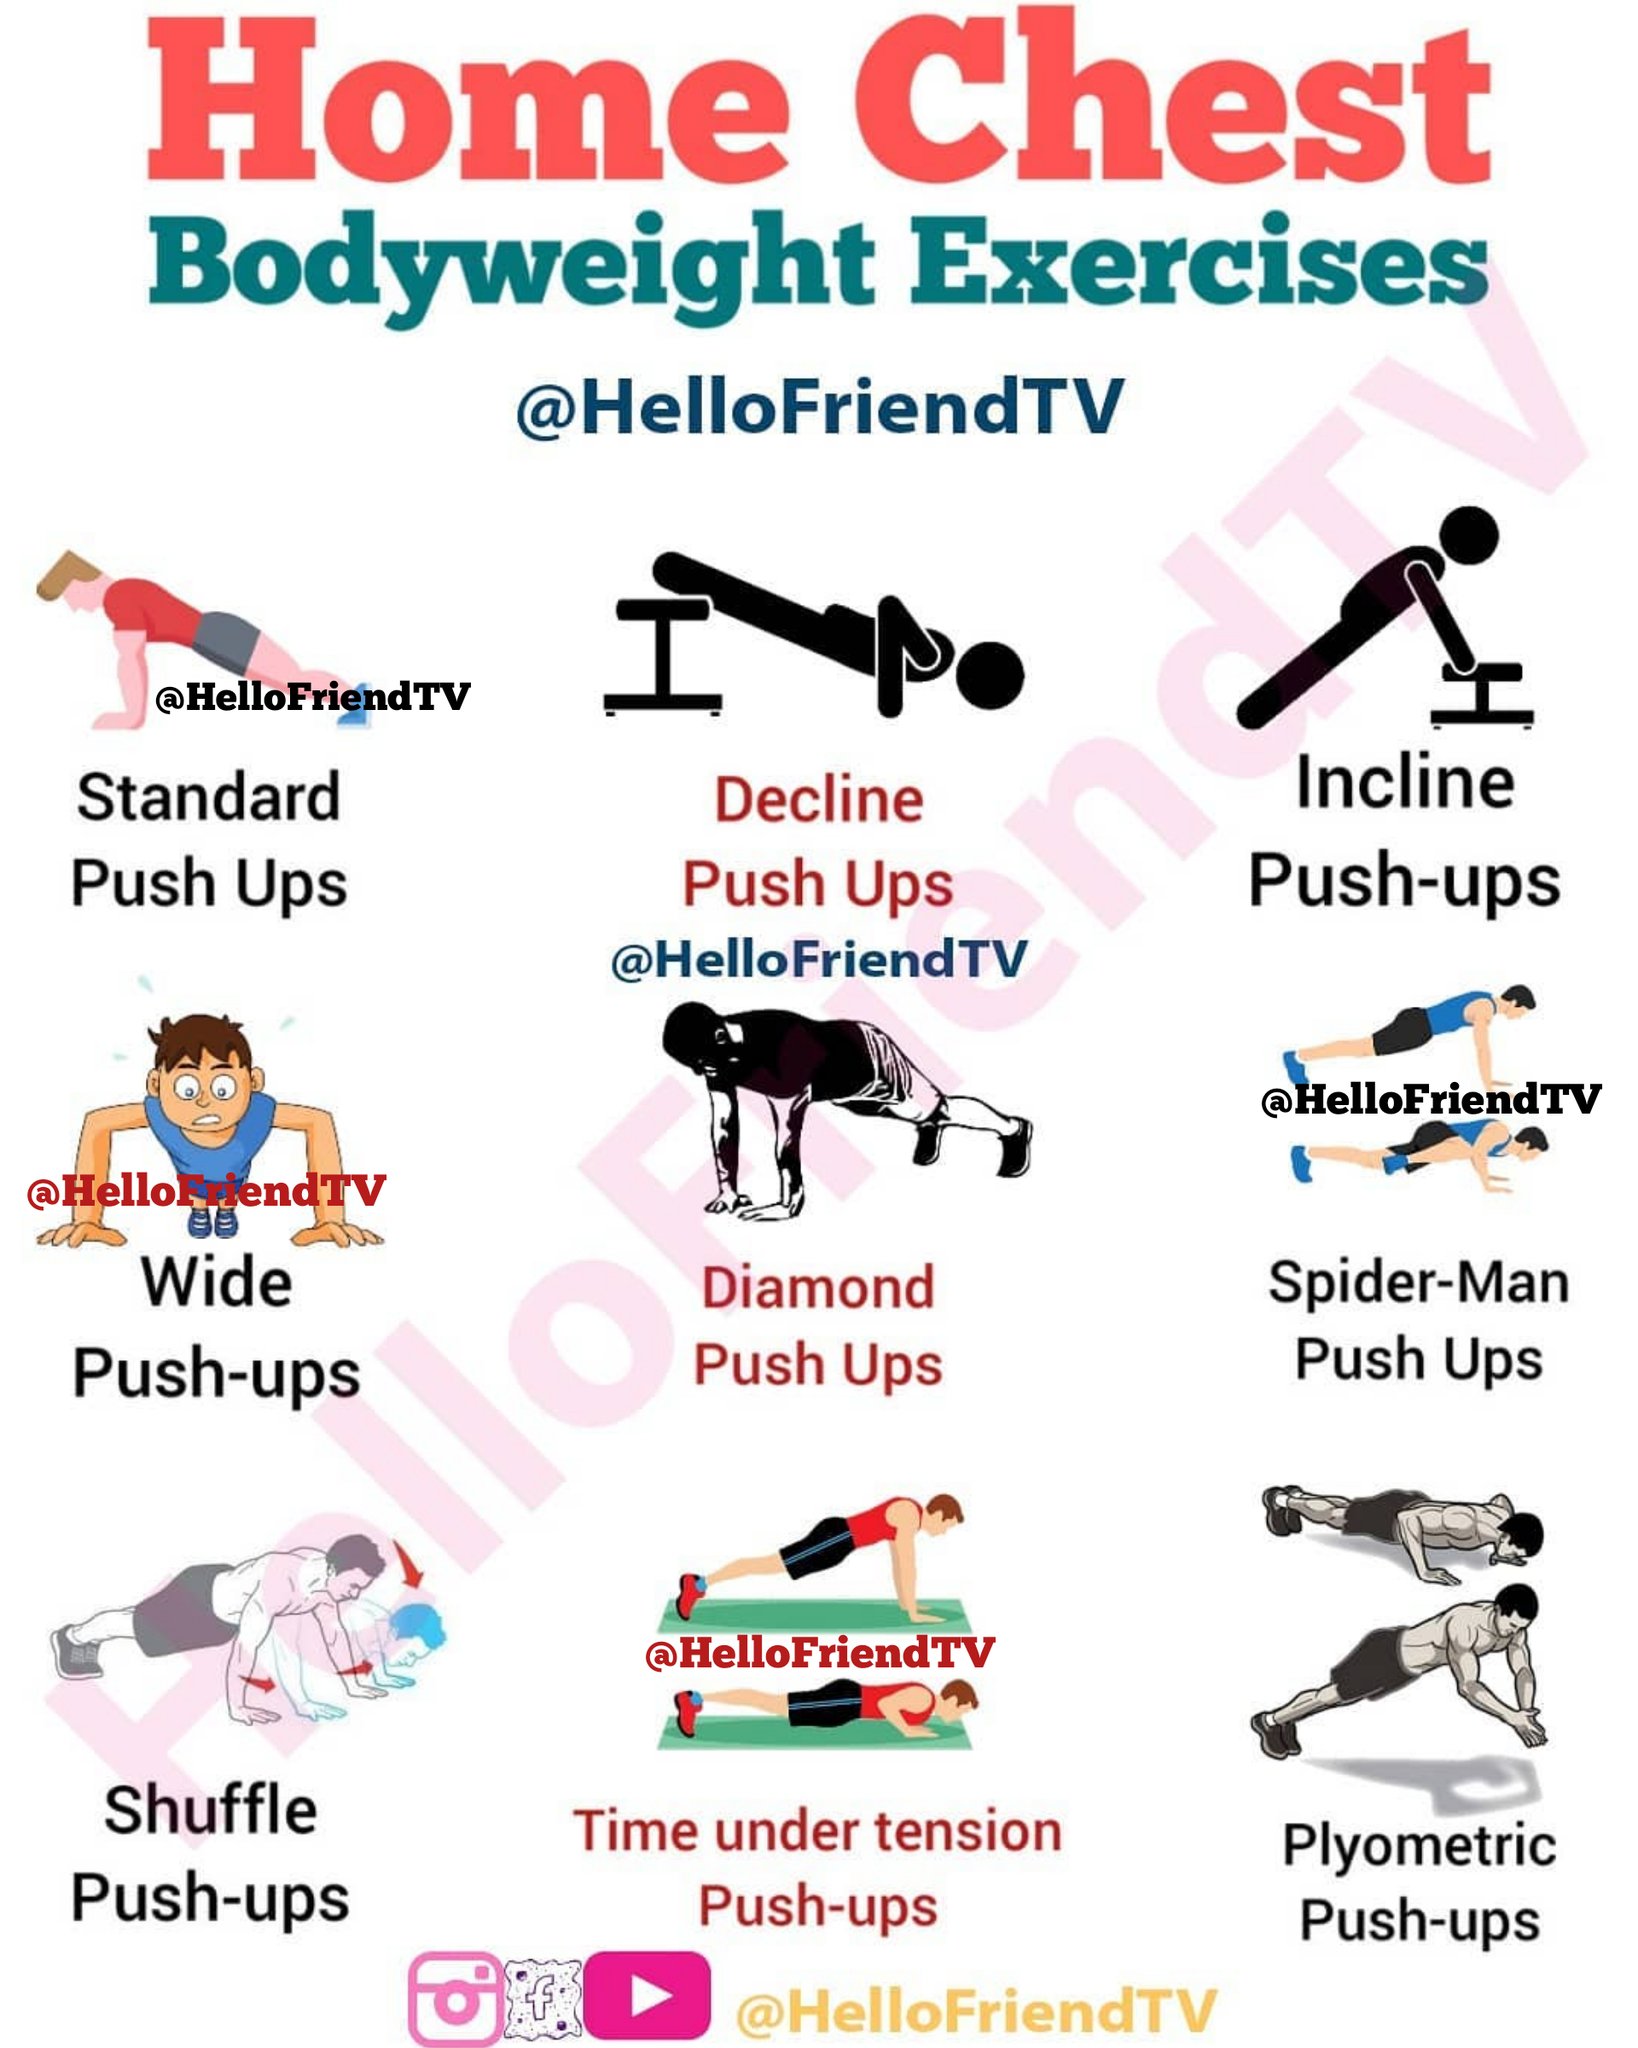 Hello Friend Tv On Twitter: "Home Chest Workout (Bodyweight Exercises) Https://T.co/9Yjezf86Bk" / Twitter